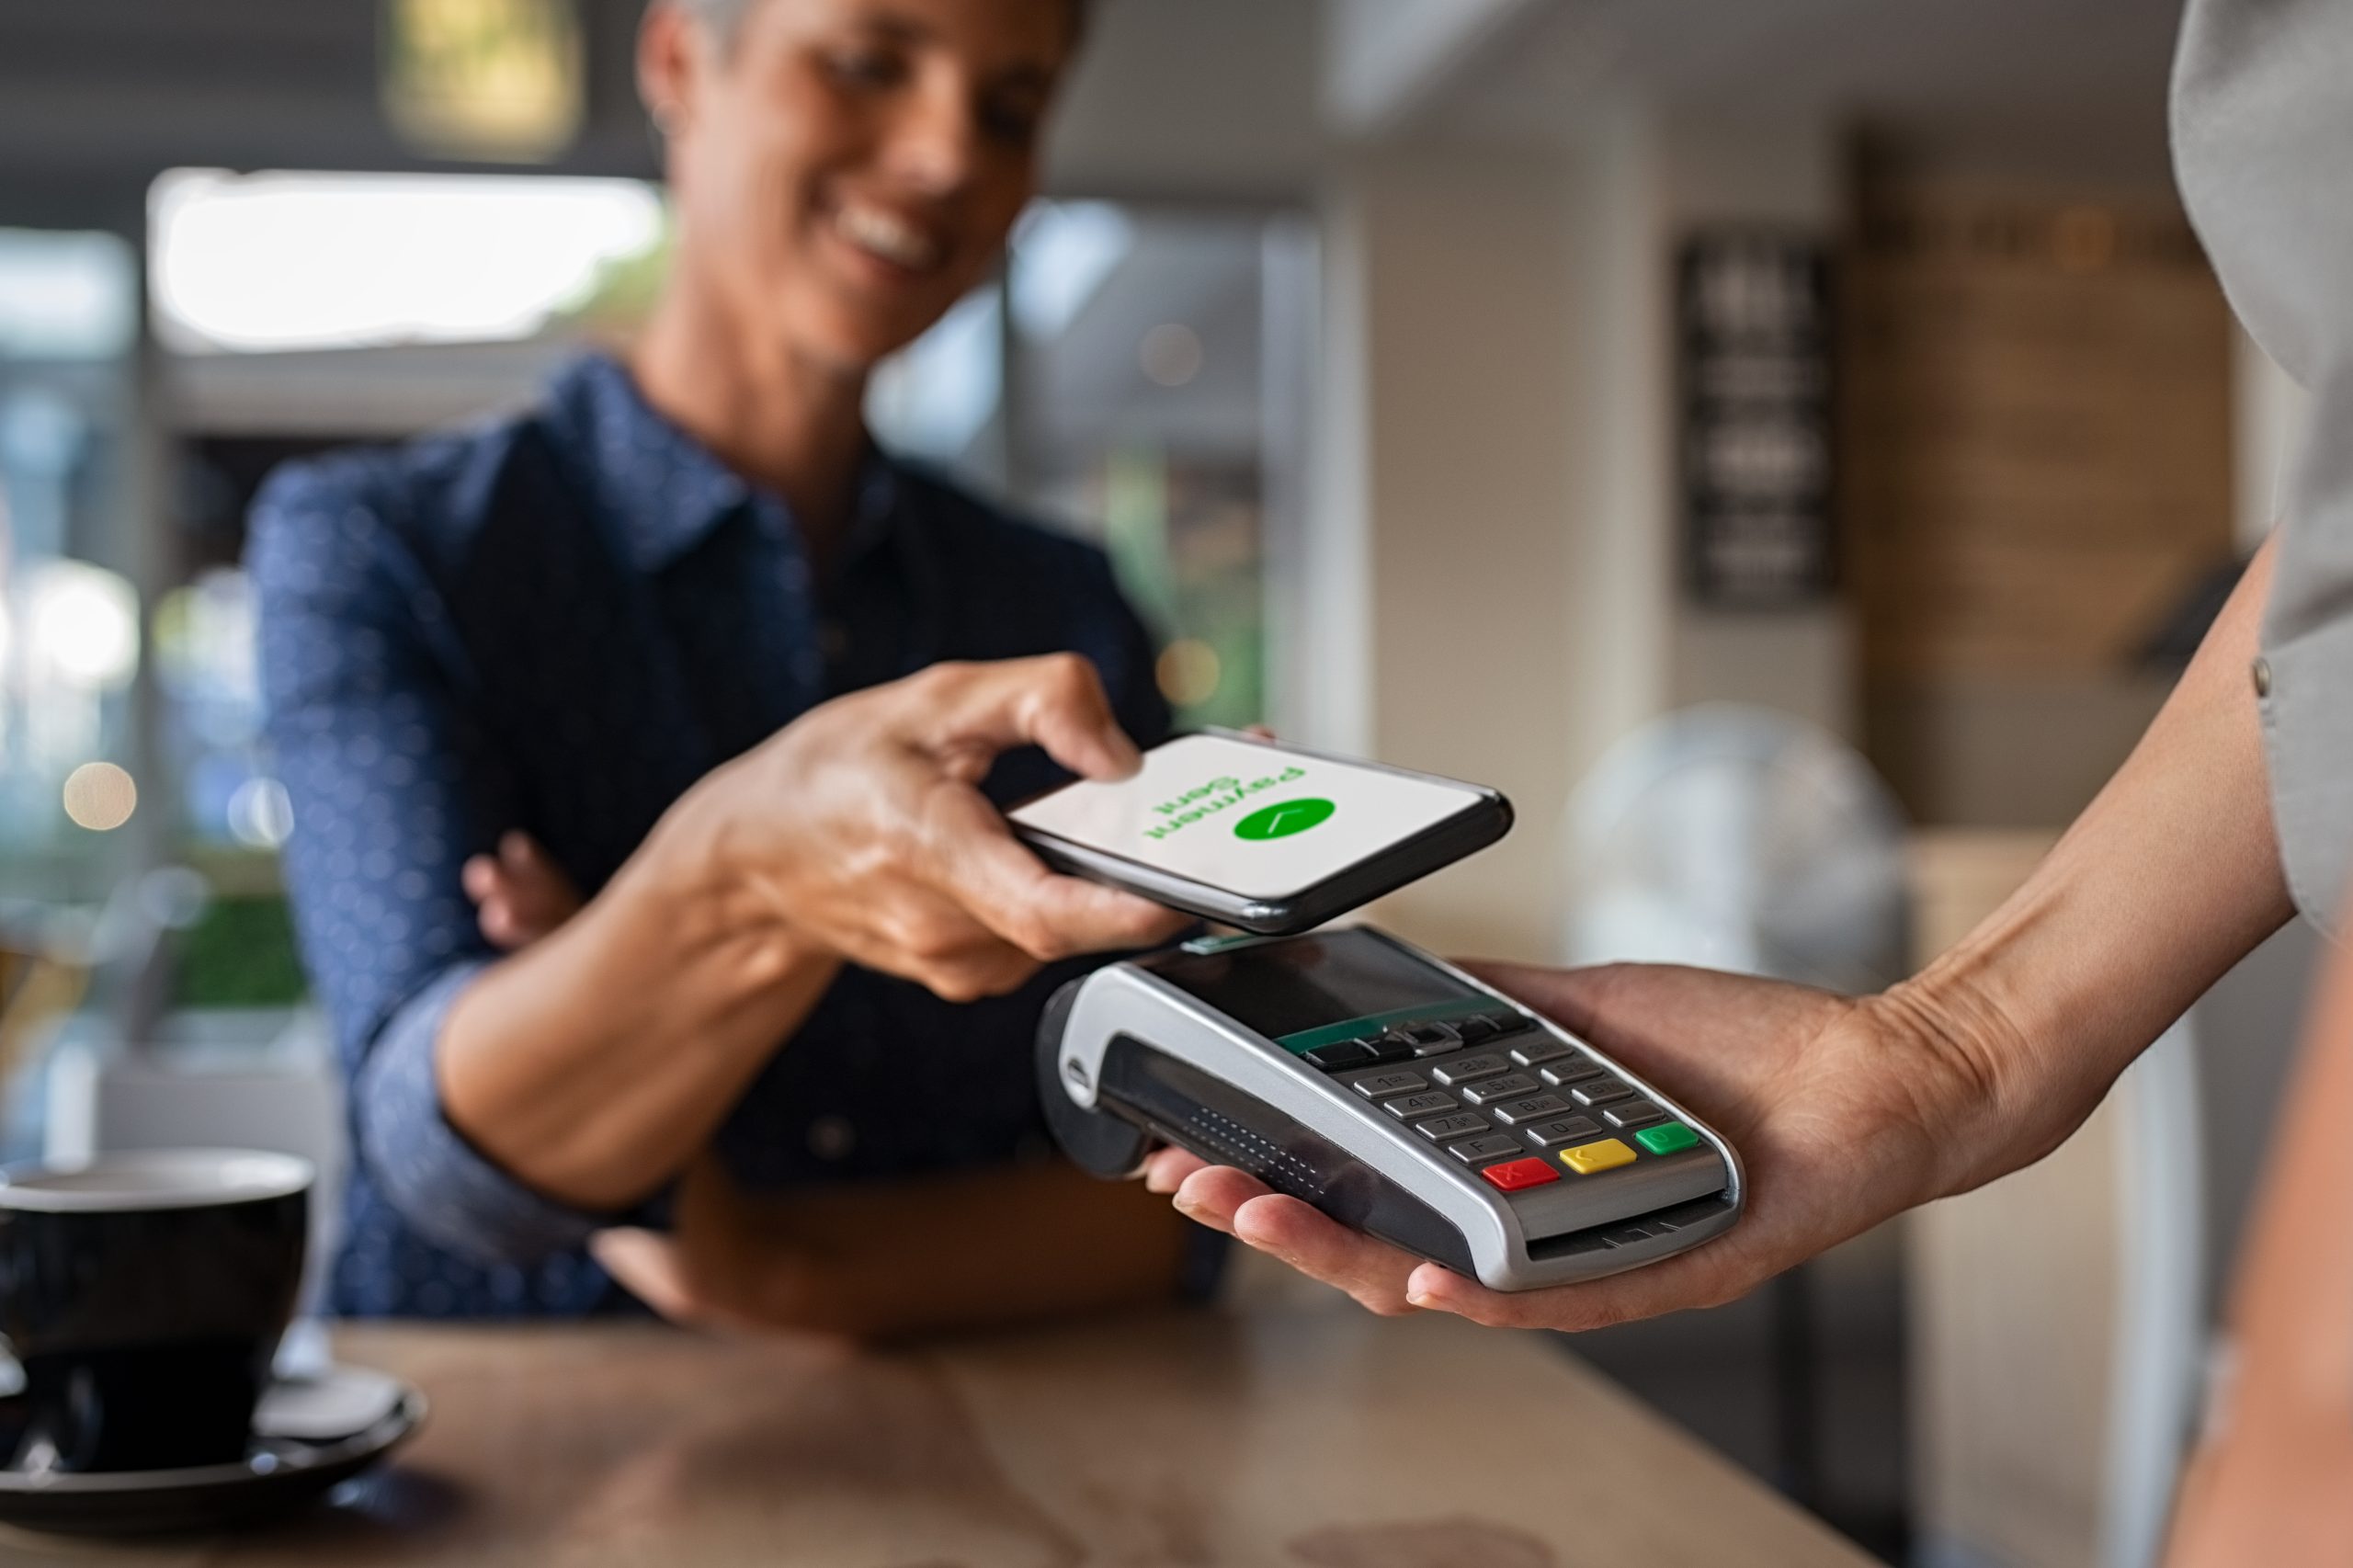 Kiss goodbye to cash – over 2.4 million contactless payments each day in Ireland